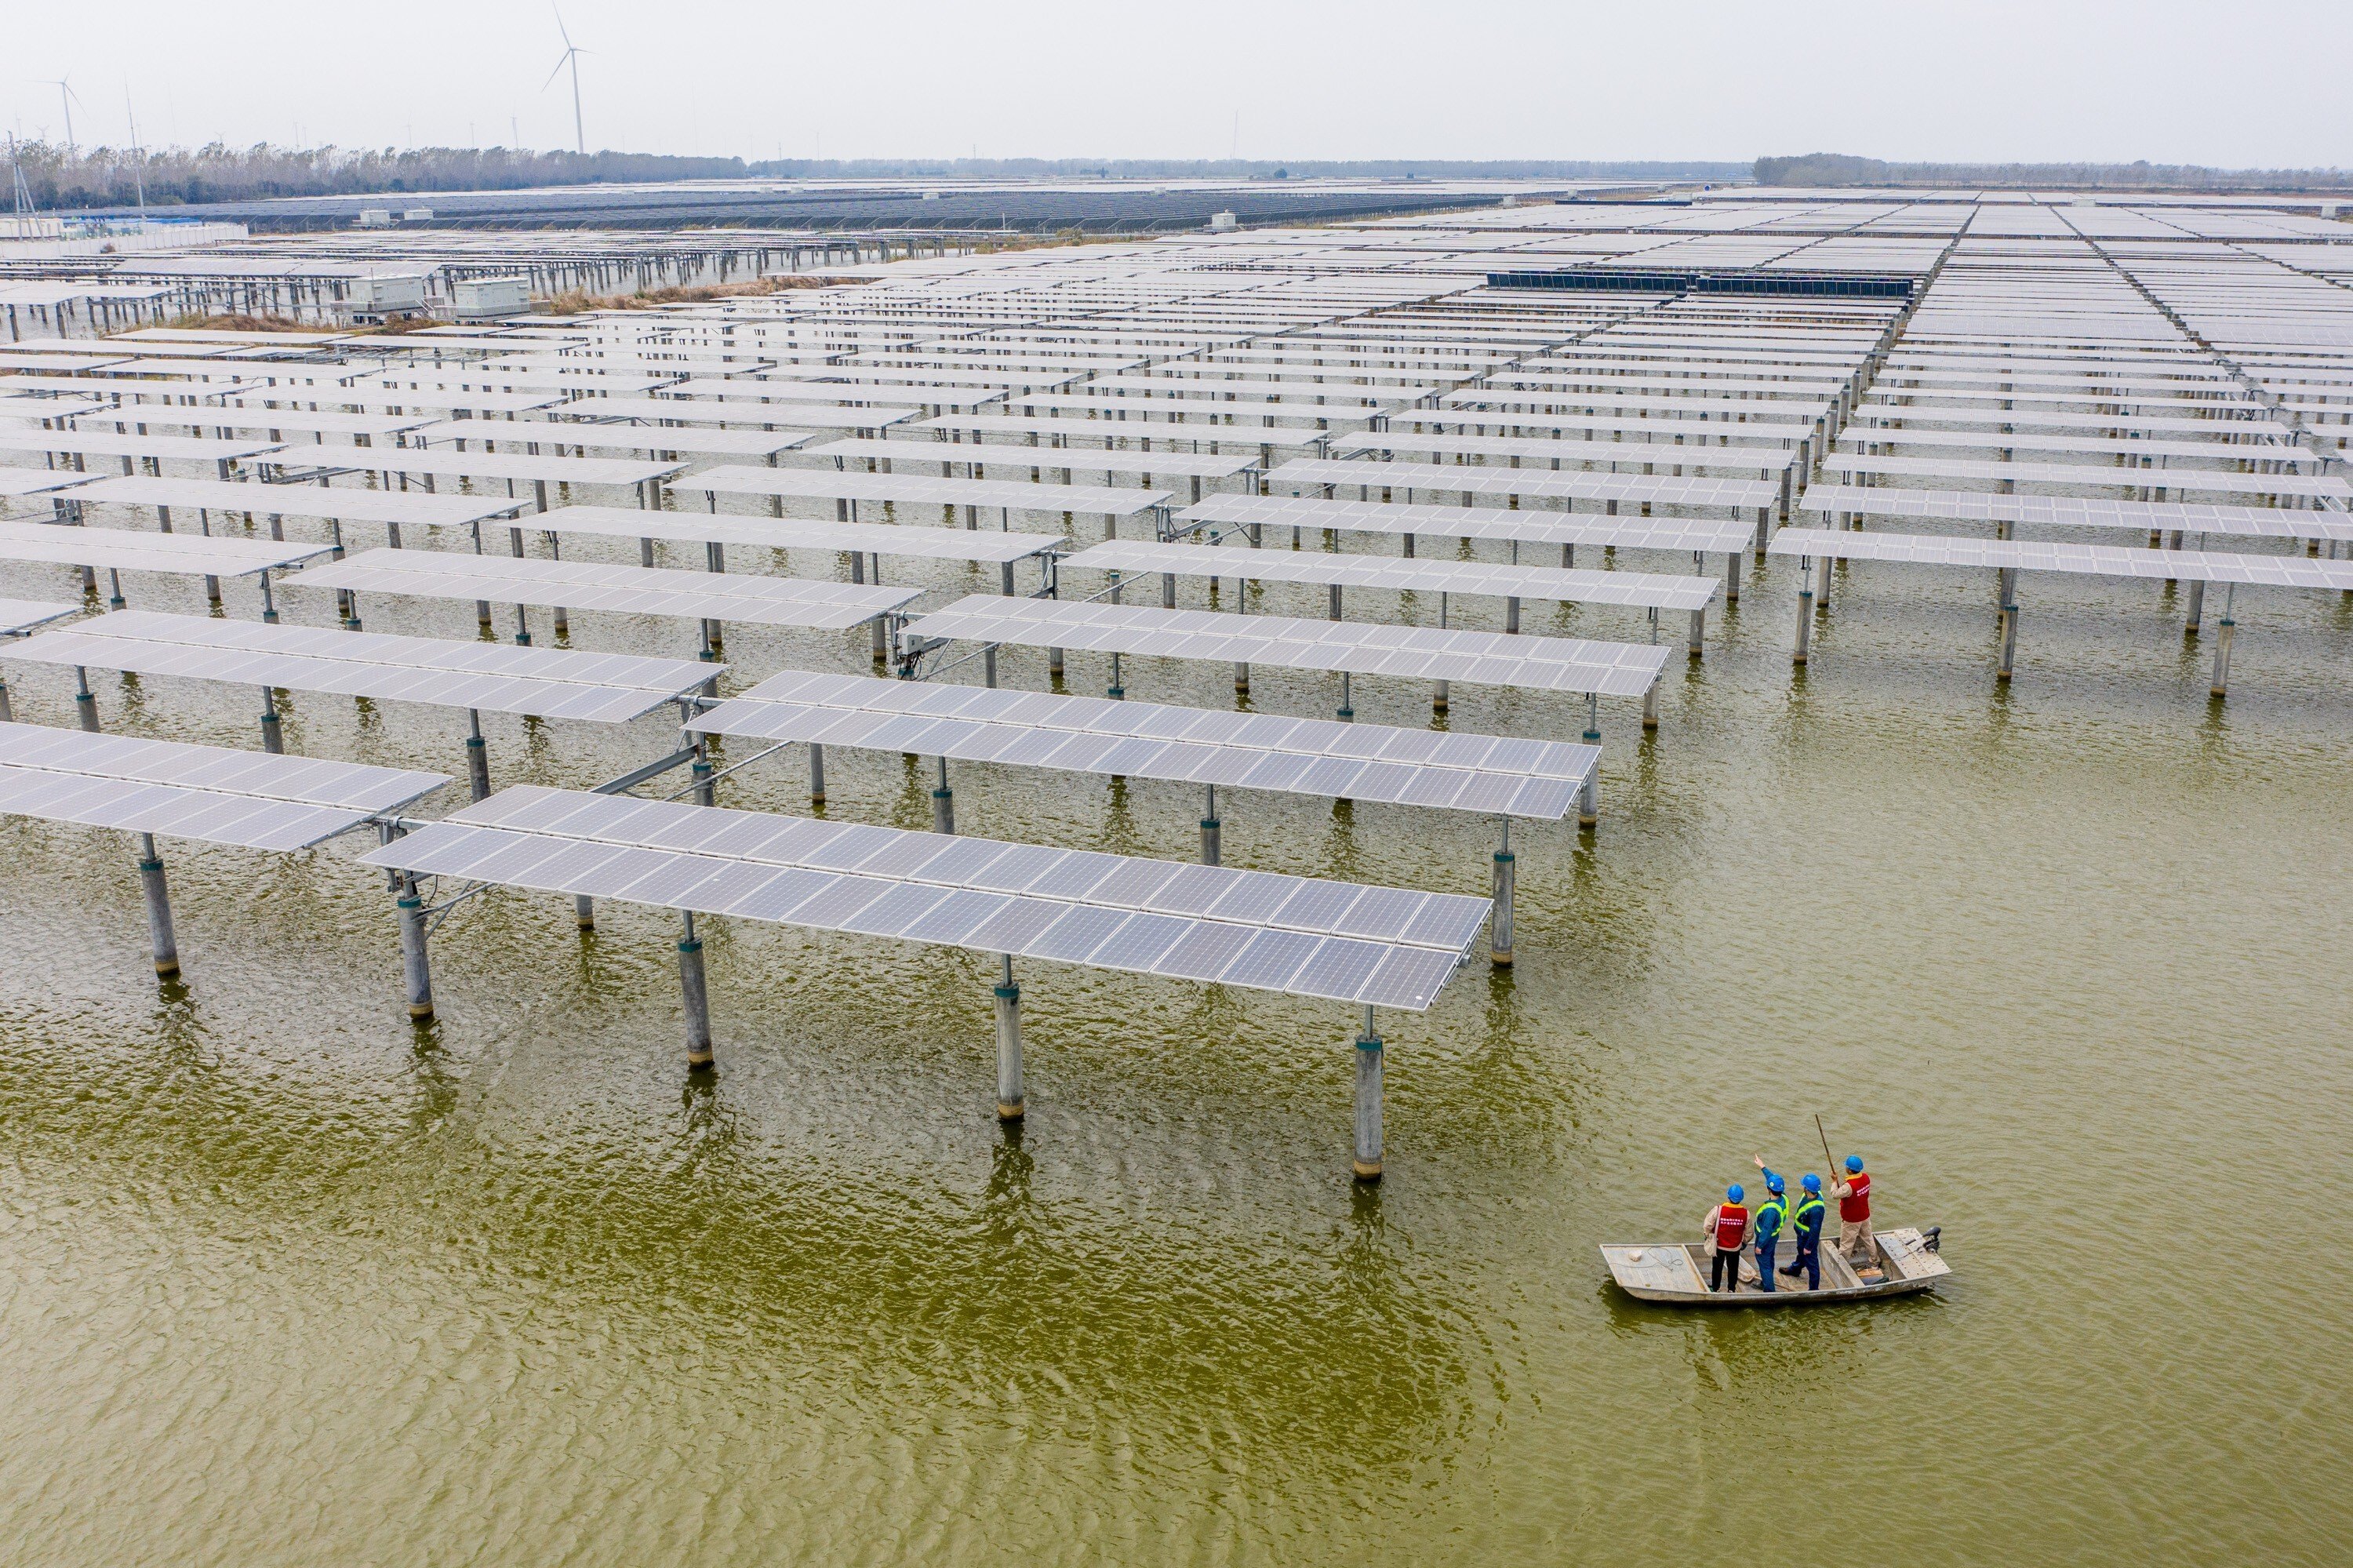 Green technologies that can help cut pollution and repair the environment are also priorities in China’s new five-year plan. Photo: Xinhua